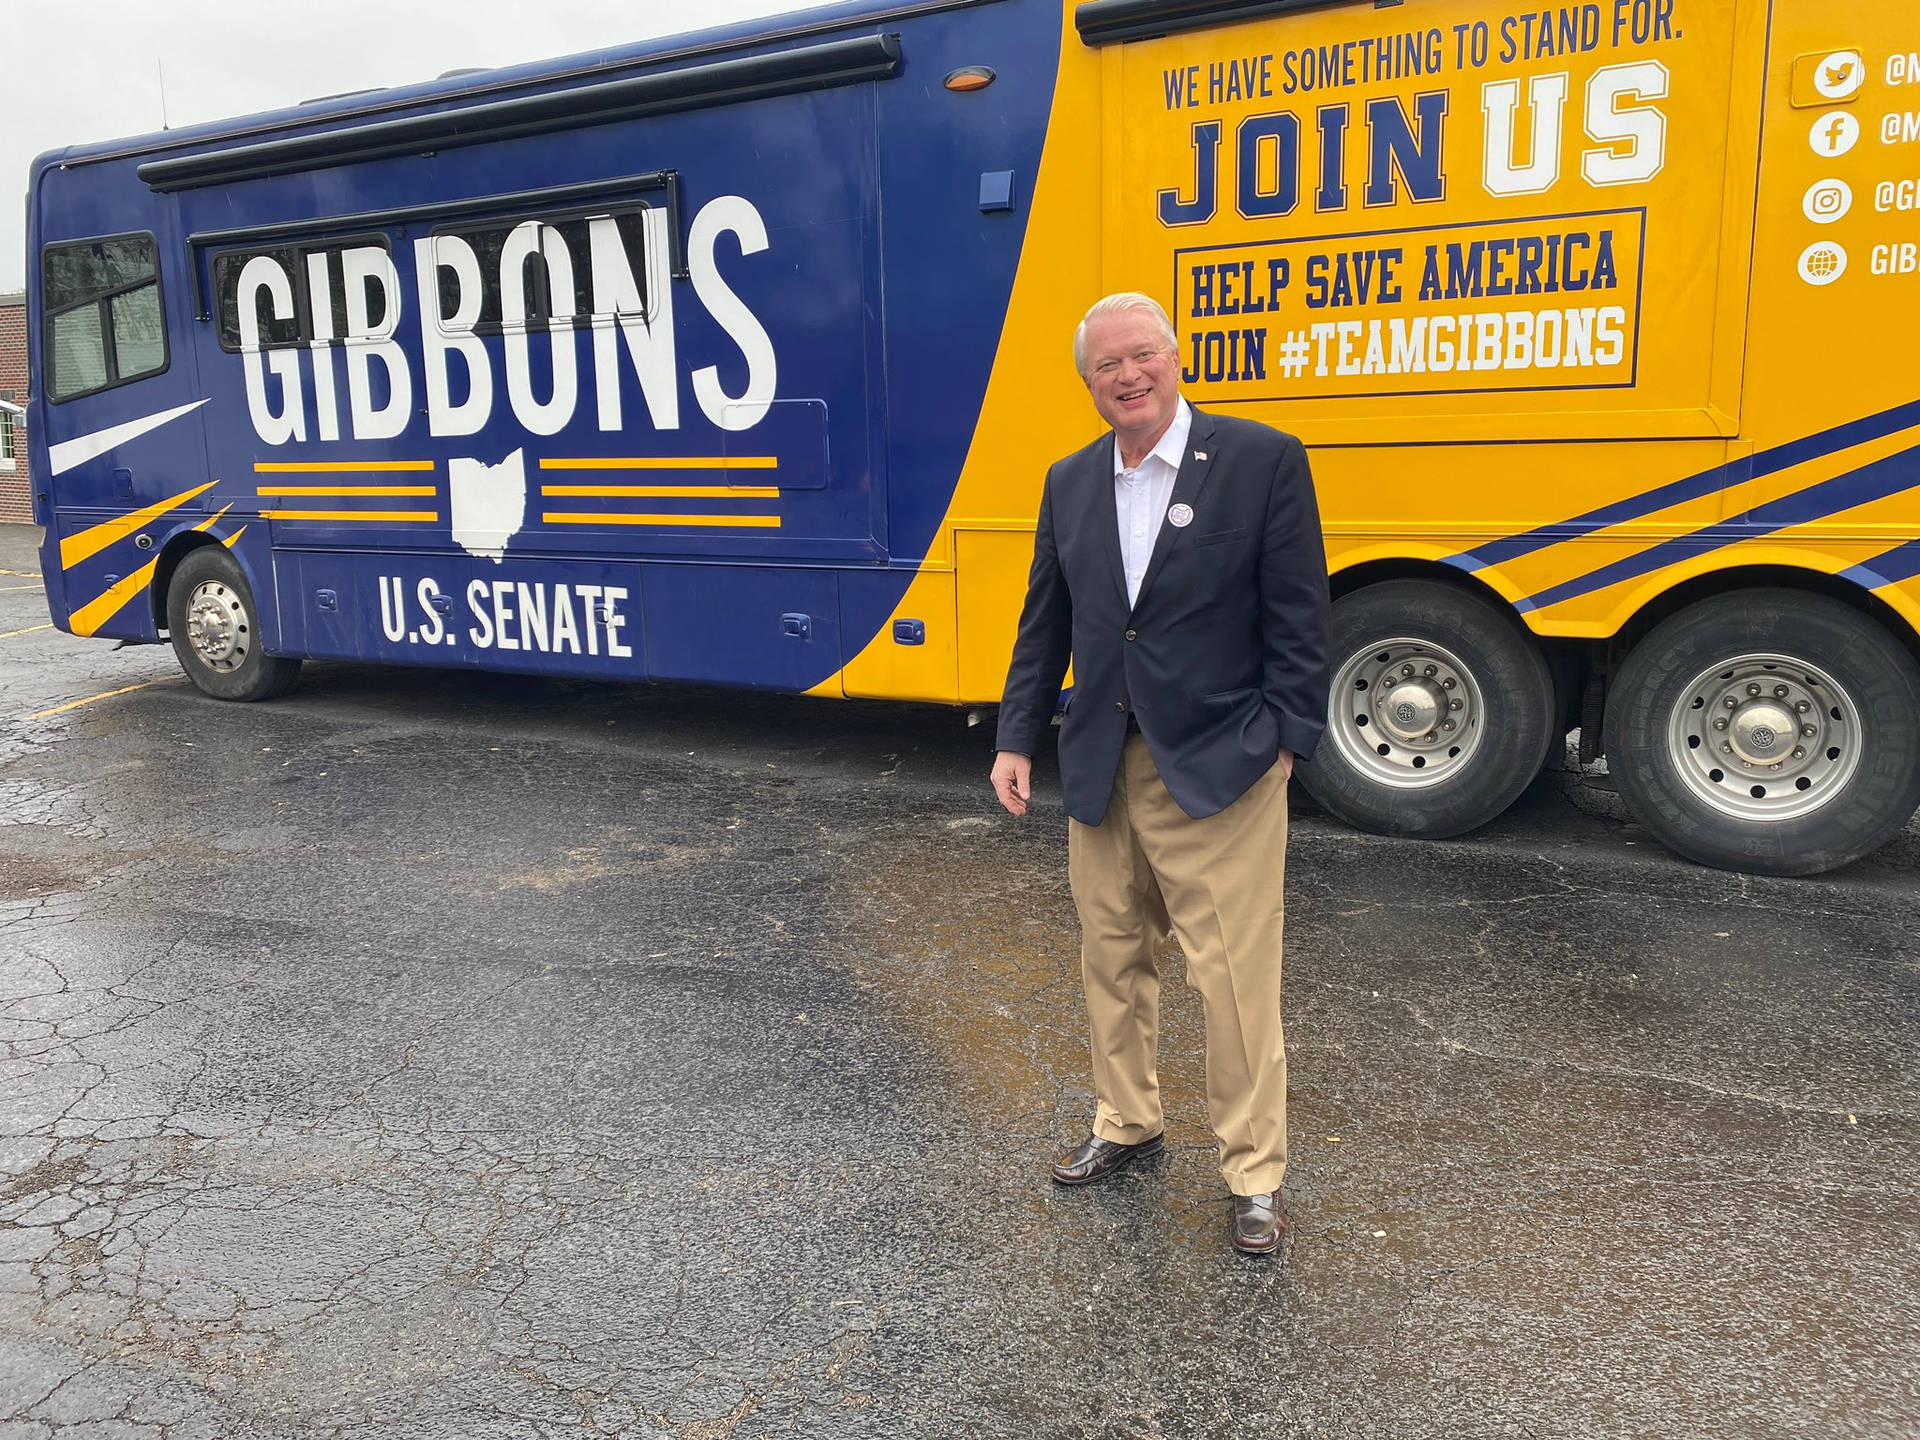 Solo Picture Of Mike Gibbons With Bus Background